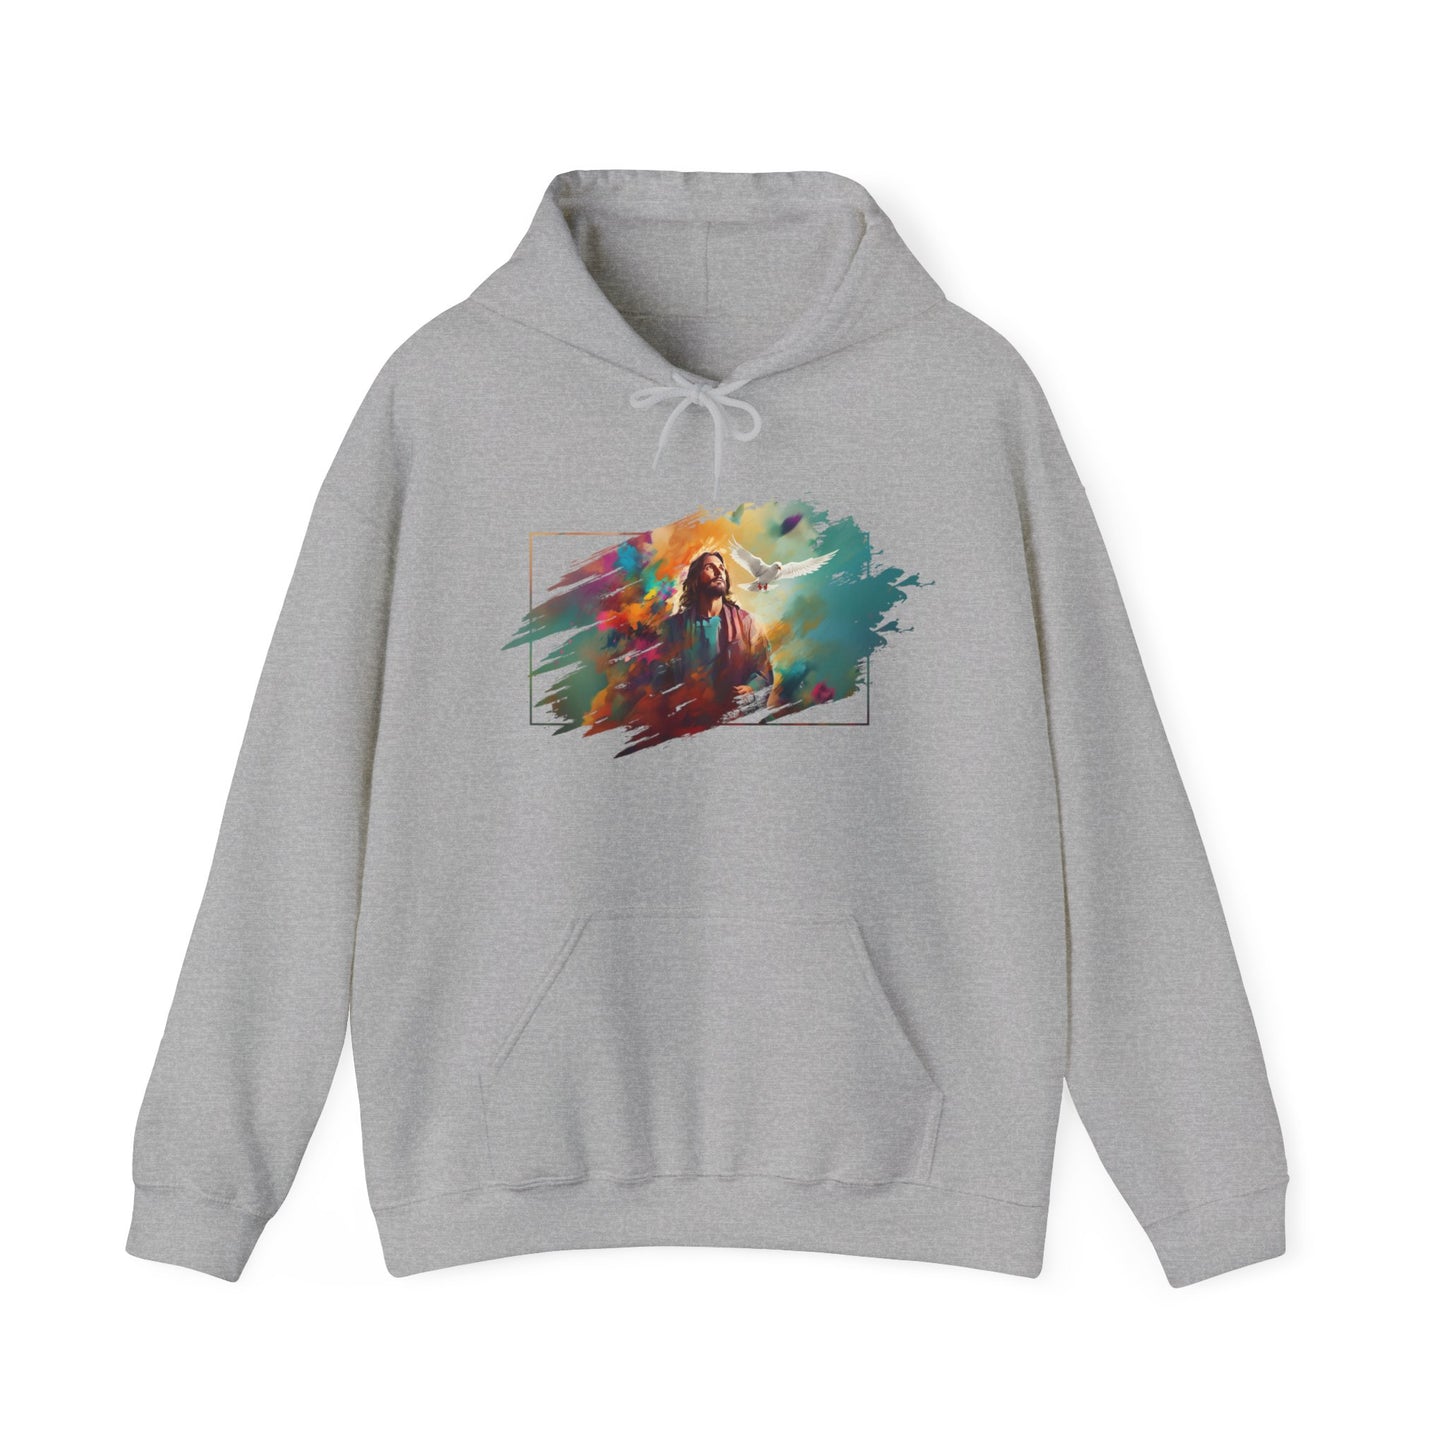 THE ANOINTED ONE Hoodie